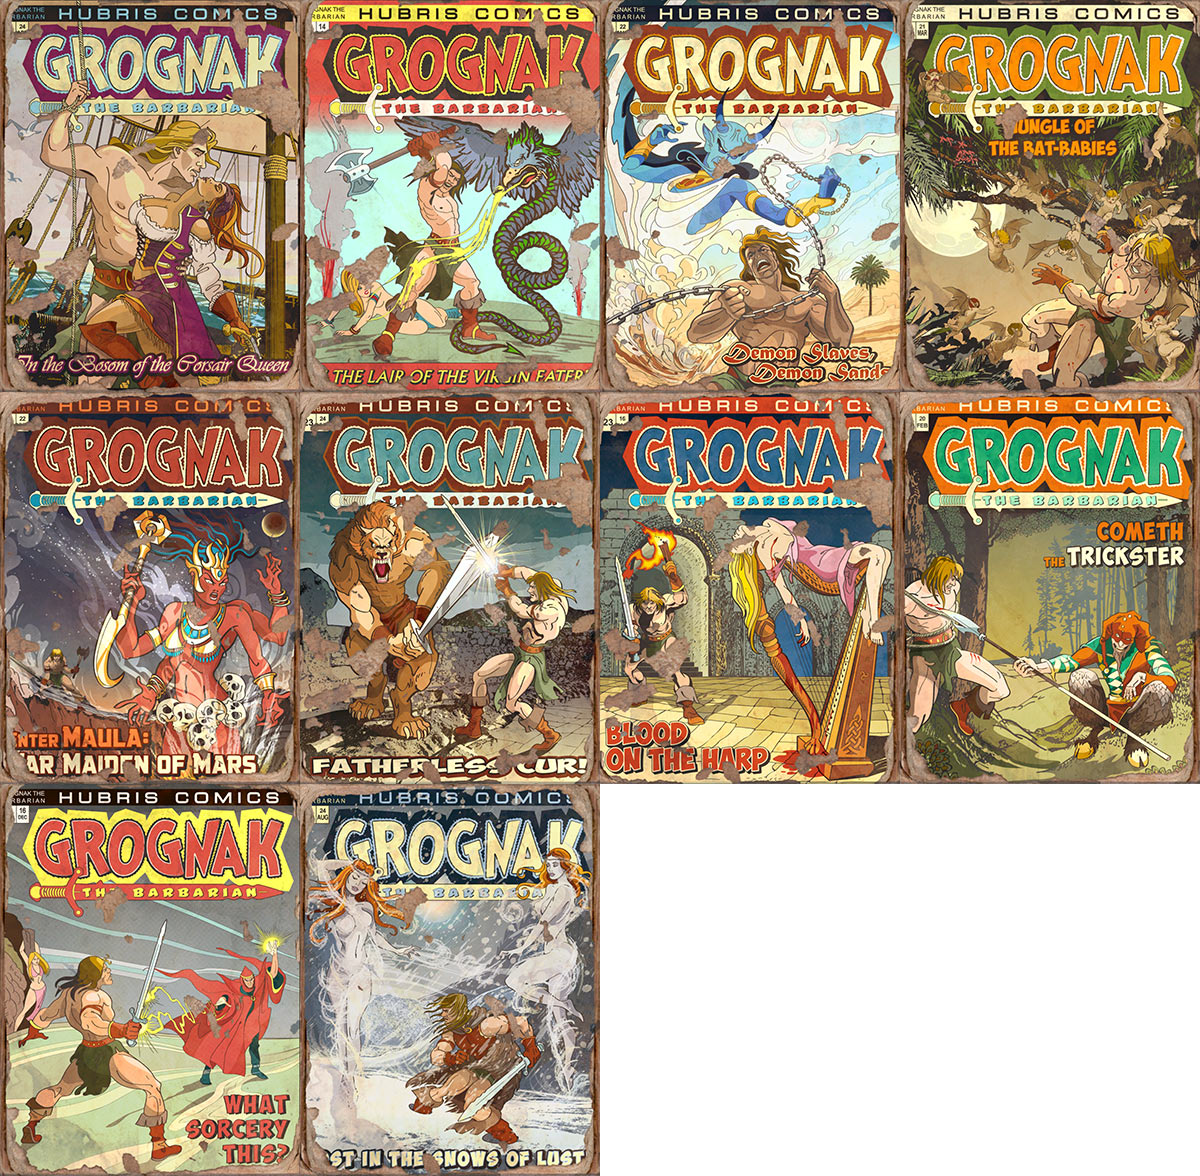 Fallout 76 - Grognak the Barbarian Magazines in Fallout 76